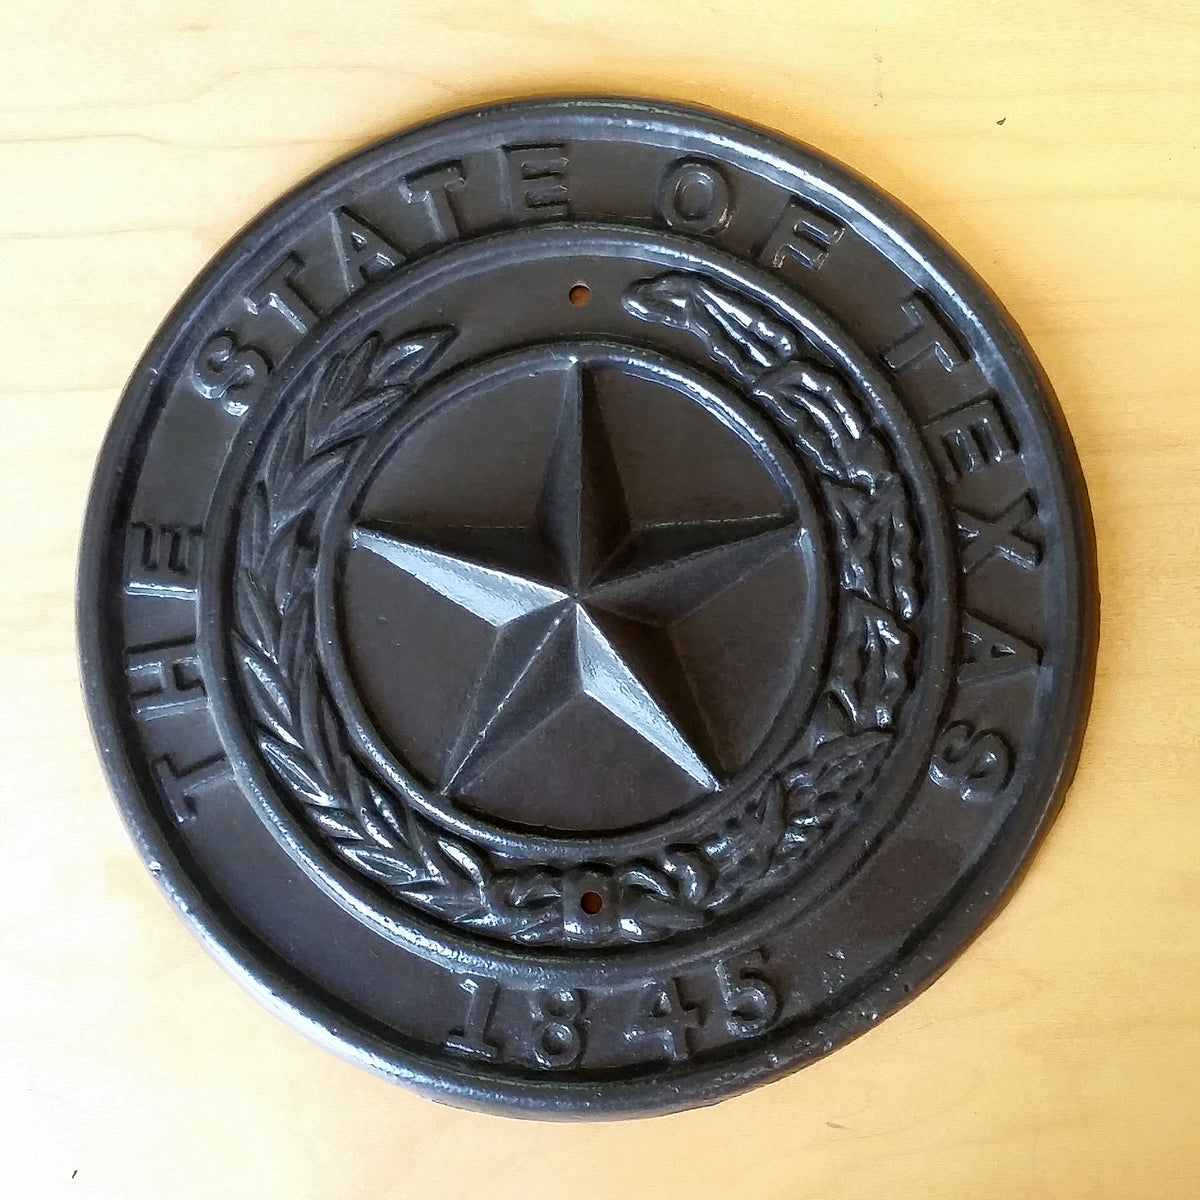 A Texas plaque made of metal, used as a decorative item, displayed on a white background.